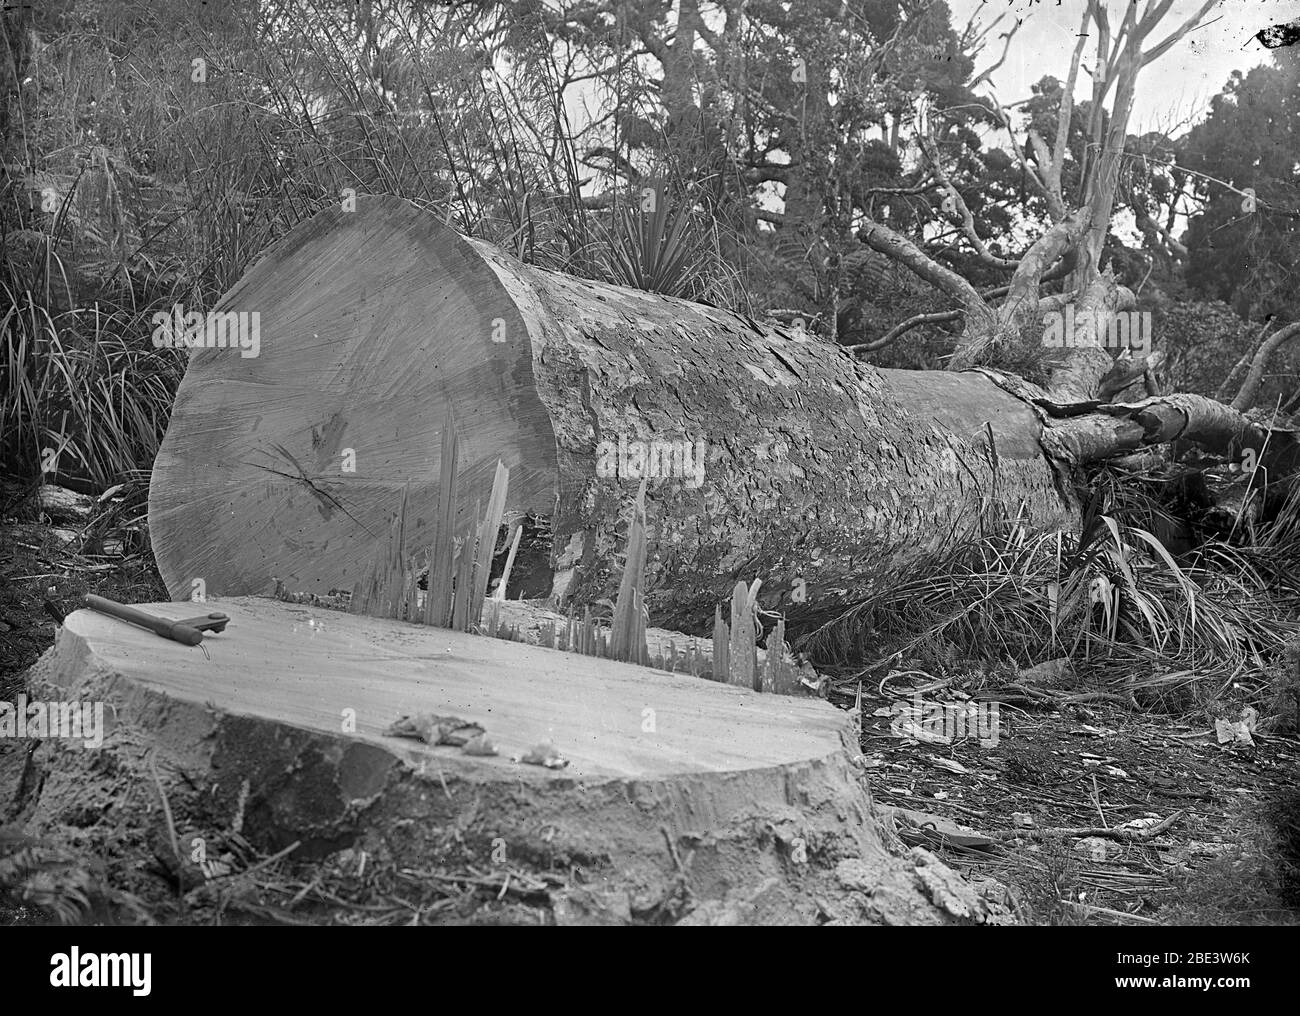 a fallen kauri tree in a stand of native bush near Piha in the North Island of New Zealand, circa 1915, by photographer Albert Percy Godber Stock Photo